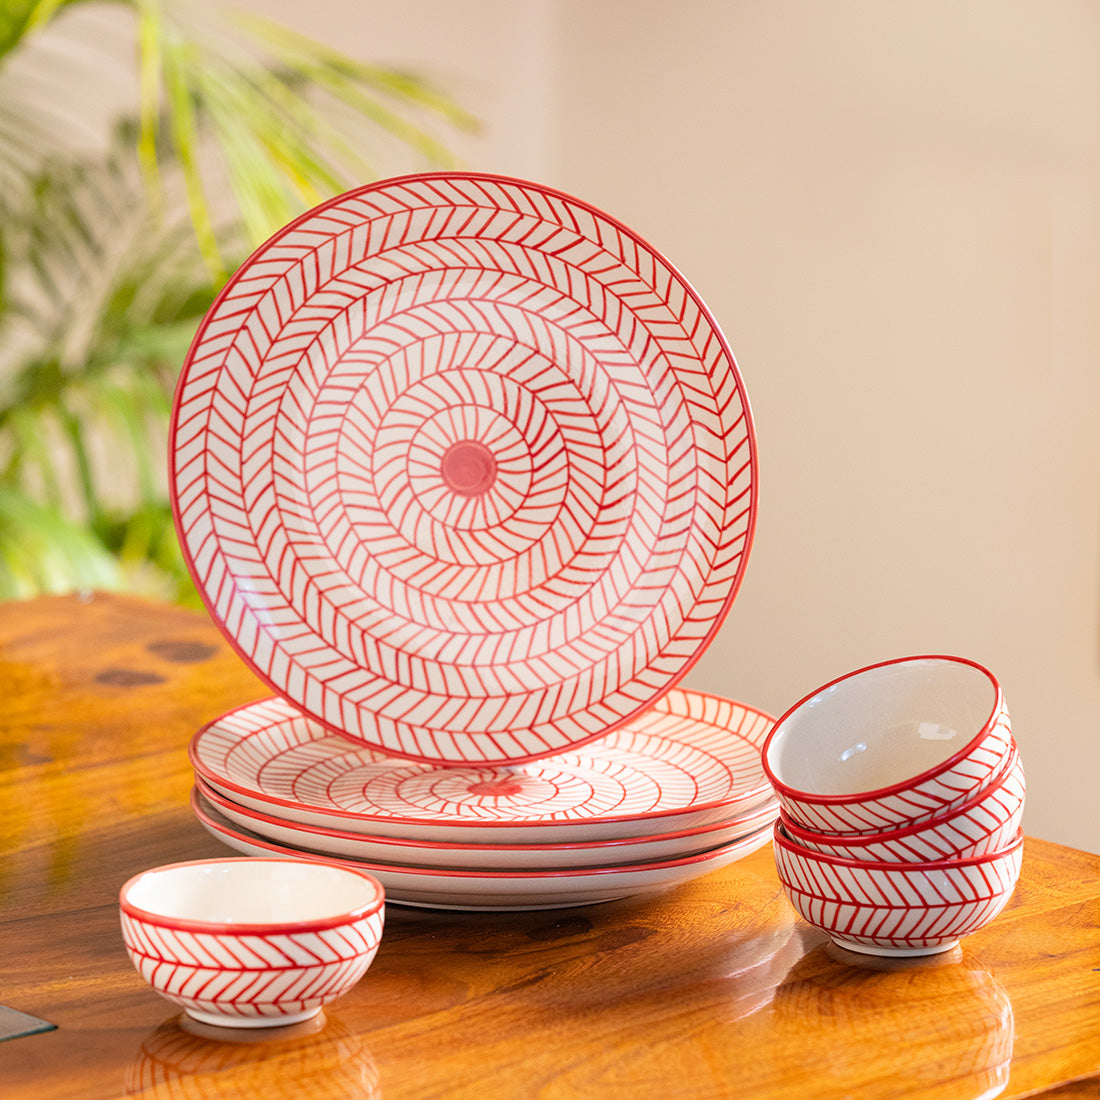 Hand-Painted Ceramic Dinner Plates With Katoris (8 Pieces, Serving for 4, Microwave  Safe)